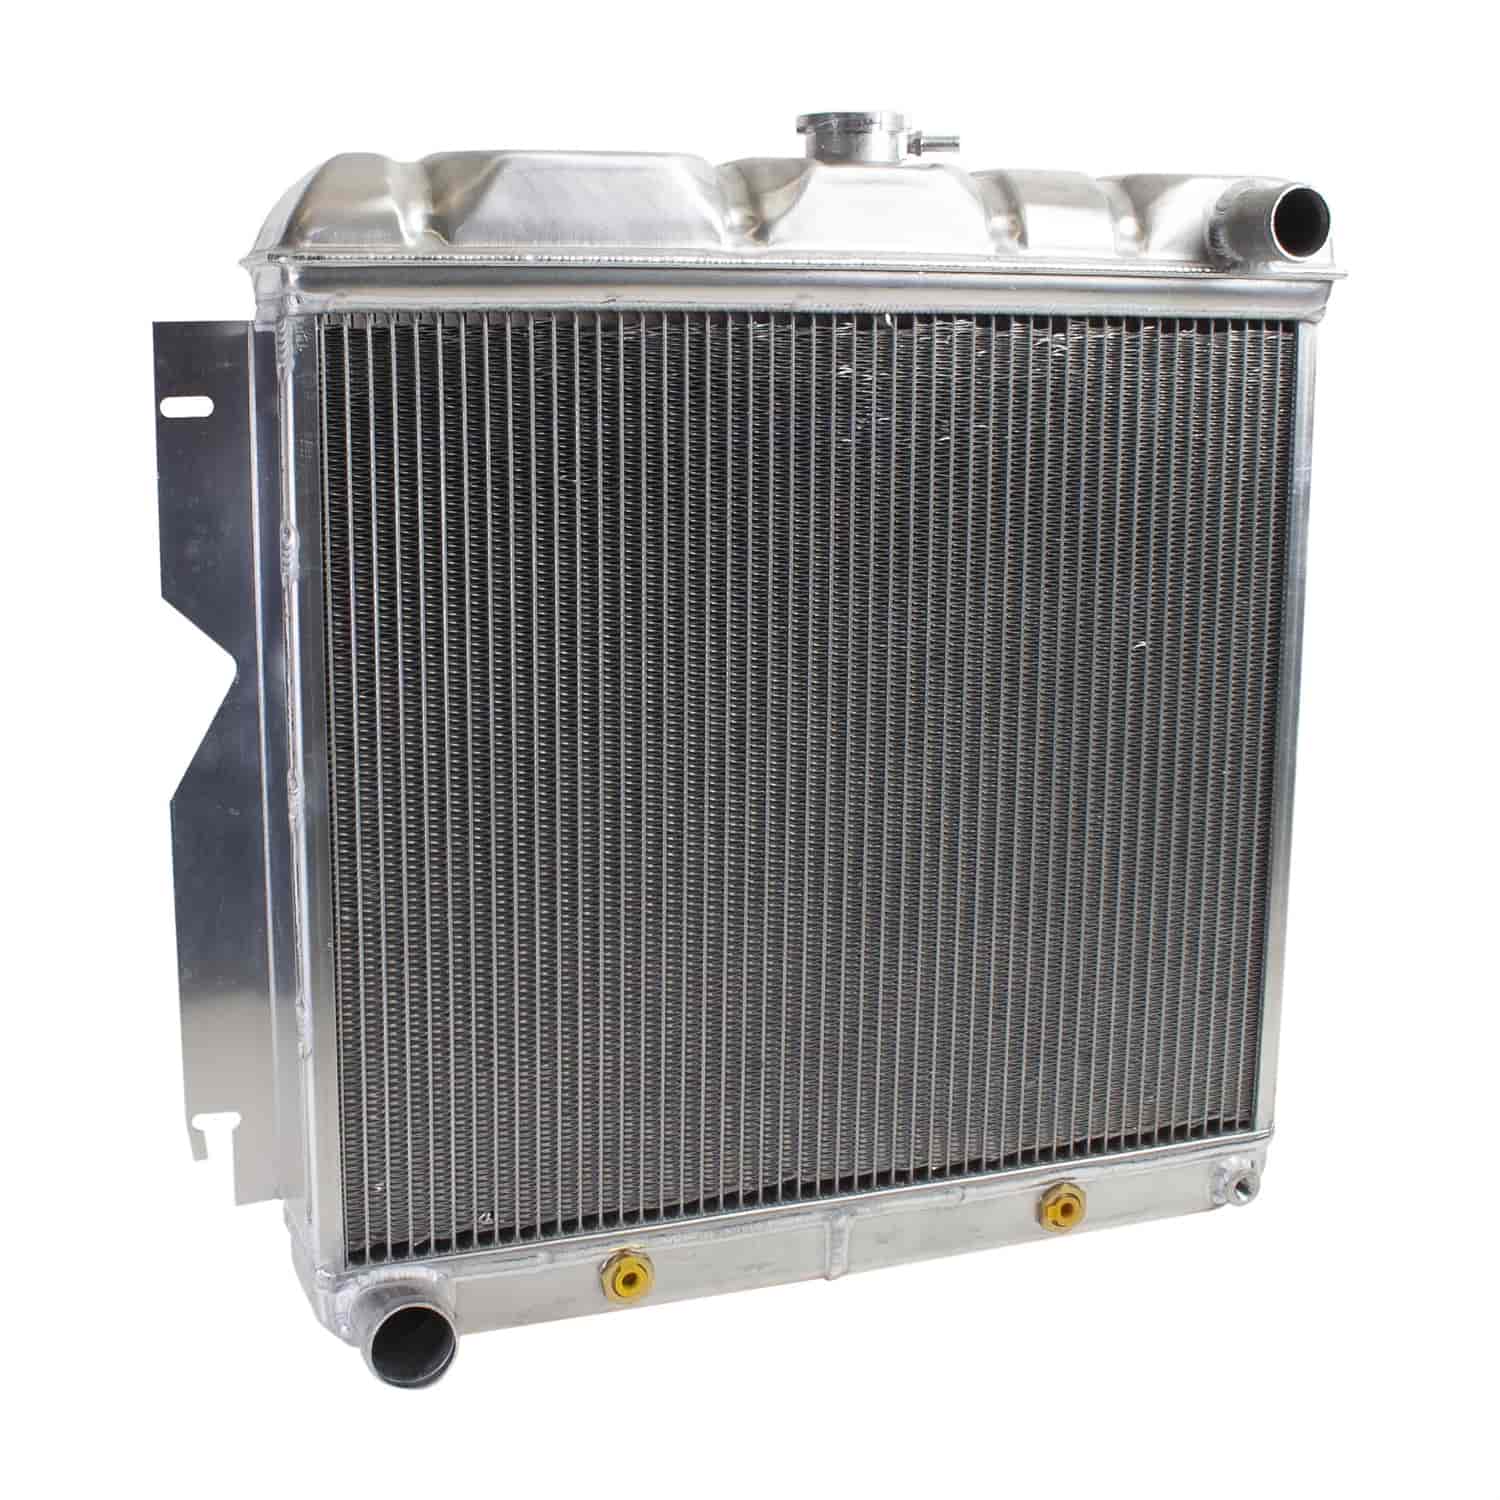 ExactFit Radiator  for 1962-1965 Belvedere, Fury, and Sport Fury with Big Block